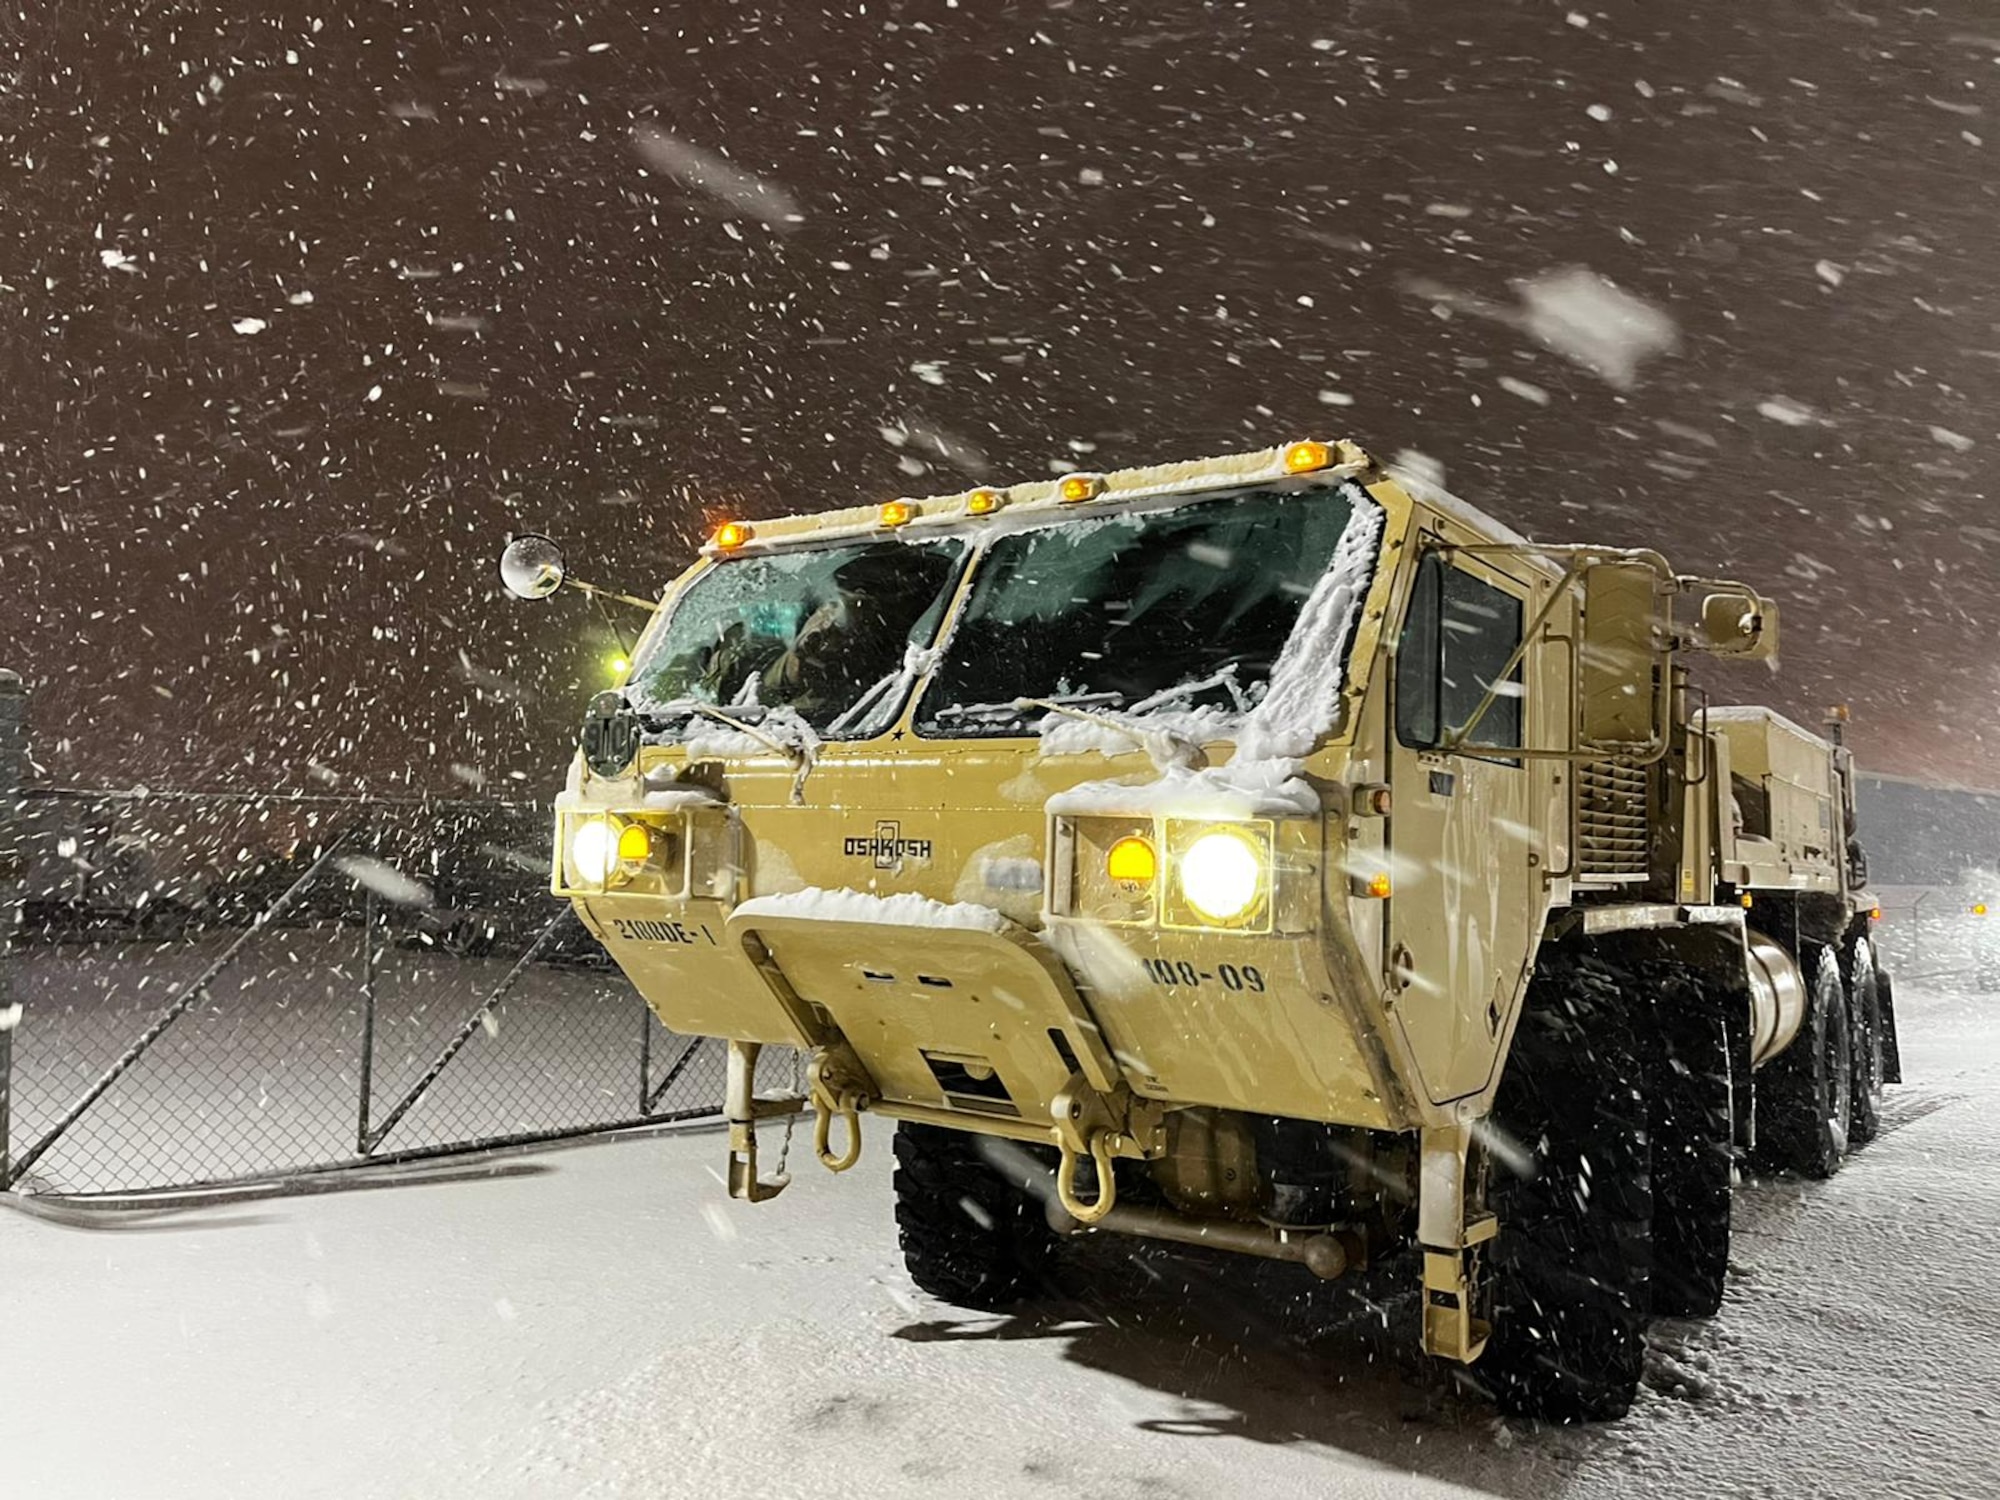 U.S. Army National Guard Soldiers with the Headquarters Support Company, 218th Maneuver Enhancement Brigade, South Carolina National Guard, stage personnel and equipment in Upstate South Carolina Jan. 16, 2022, in response to winter storm conditions. The Soldiers were called in to help keep roads clear so that state agencies and first responders could respond to citizens' needs.